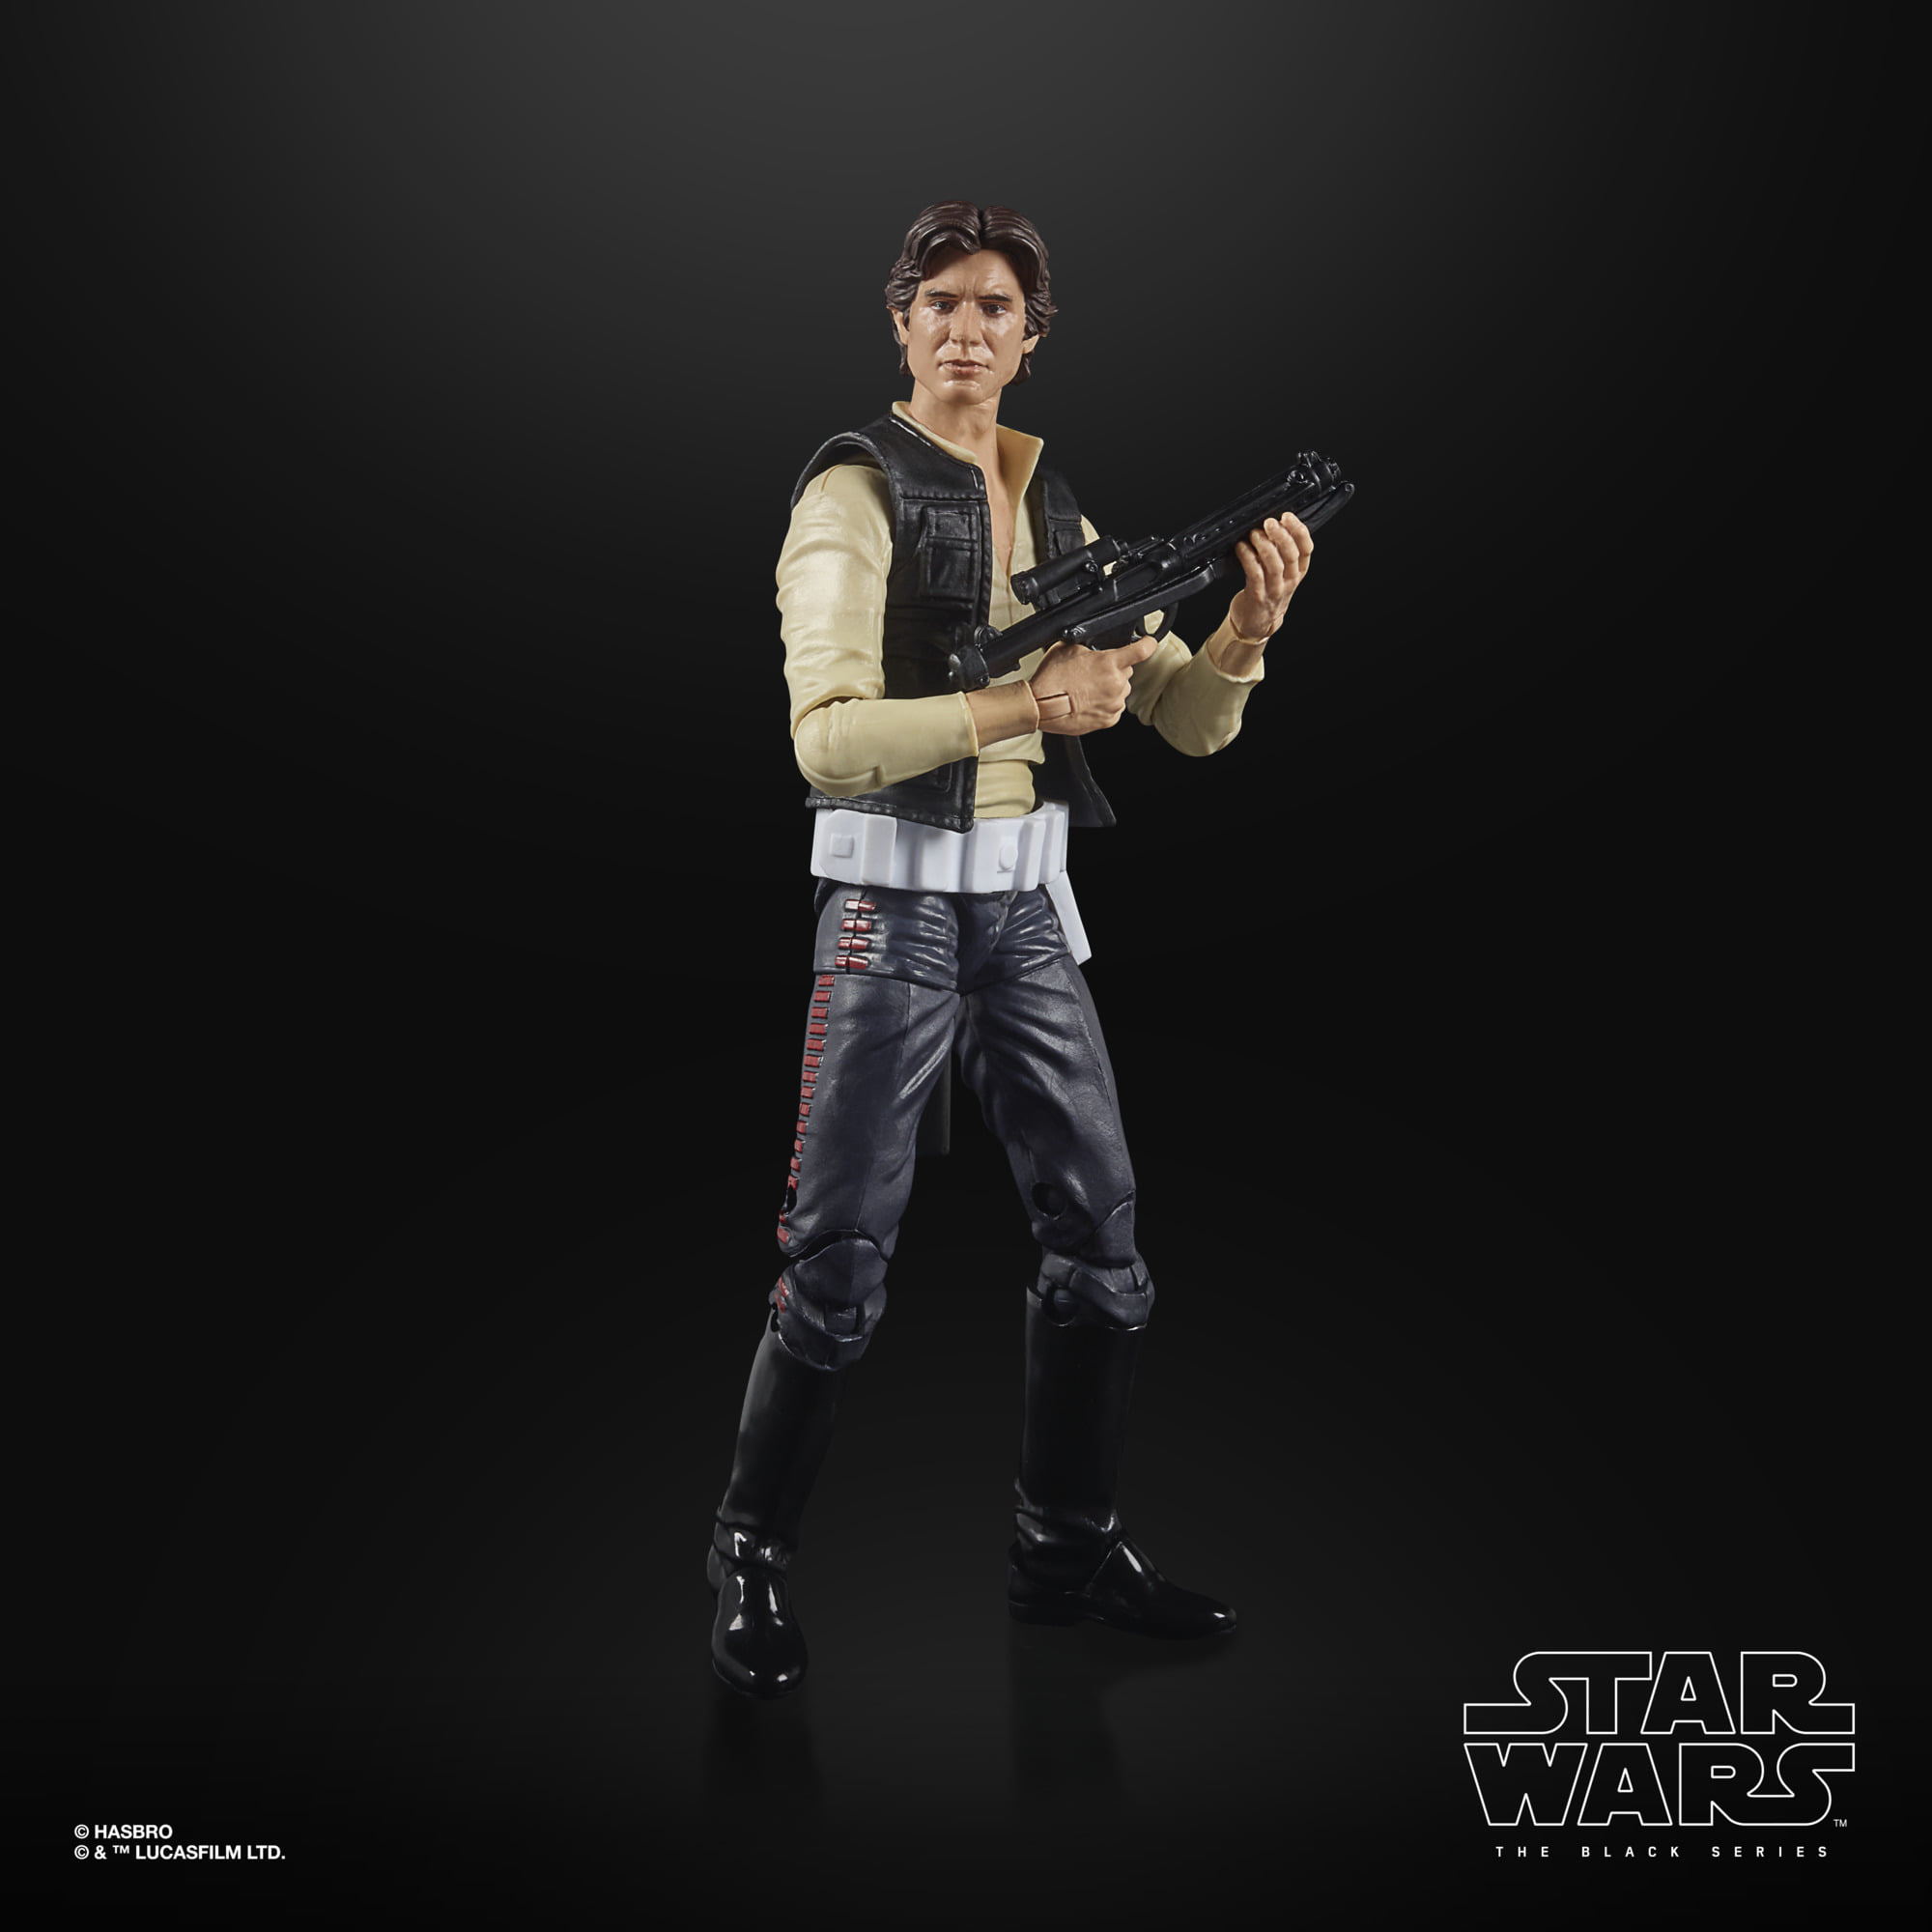 Star Wars The Black Series THE POWER OF THE FORCE - Han Solo F32655L0 5010993899708